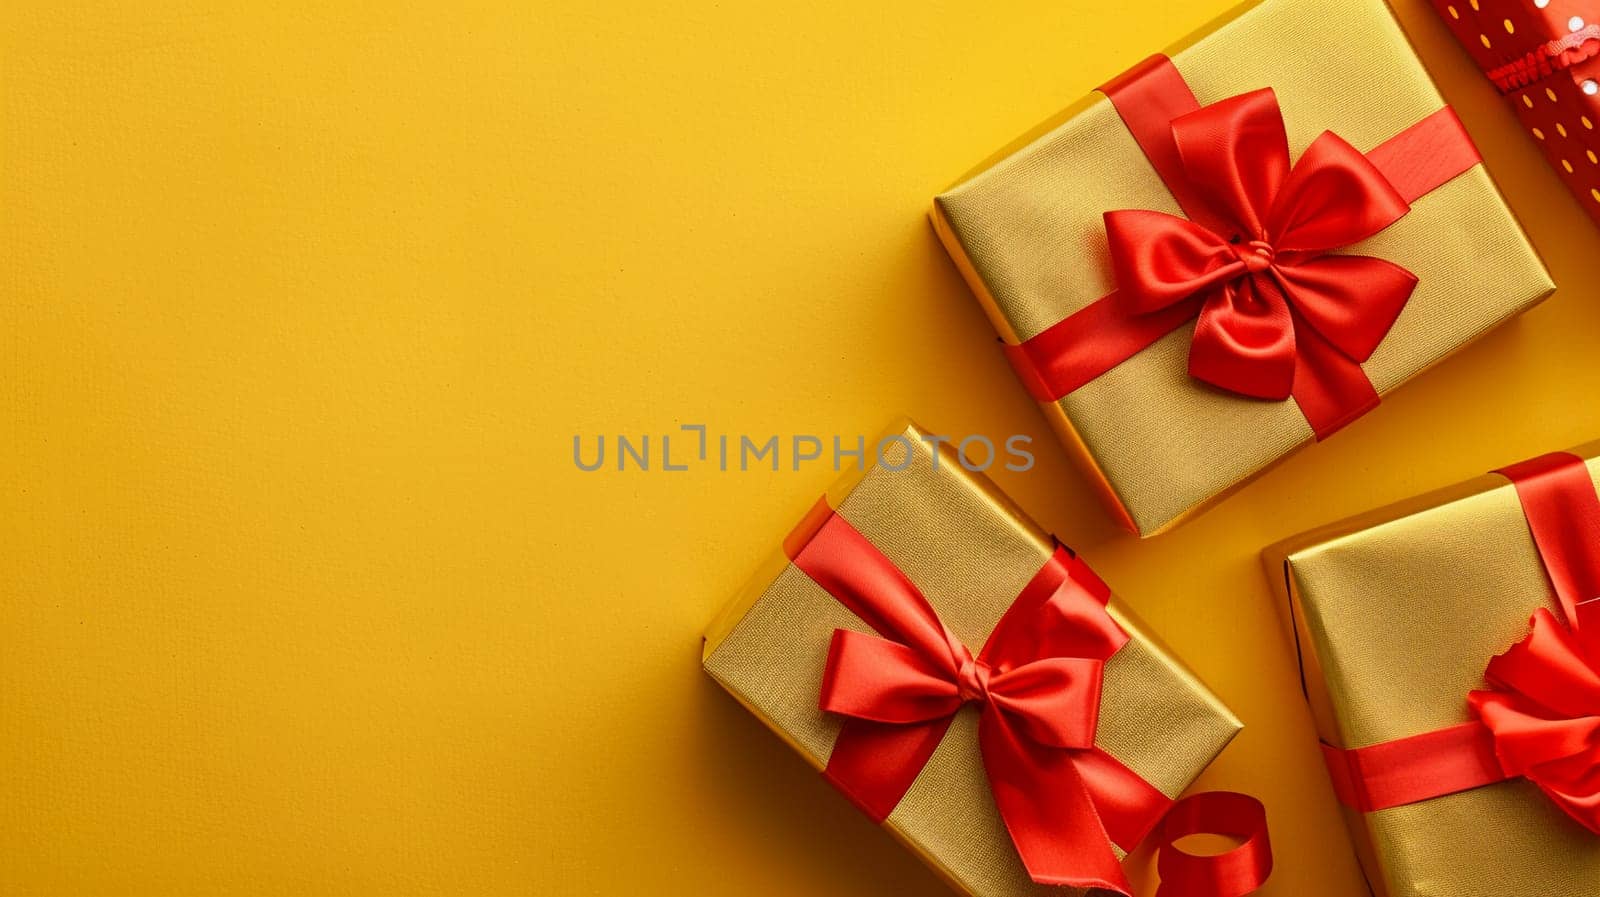 Vibrant top view of golden gift boxes tied with red ribbons, symbolizing celebration, surprise, and festive moments on bright yellow background.